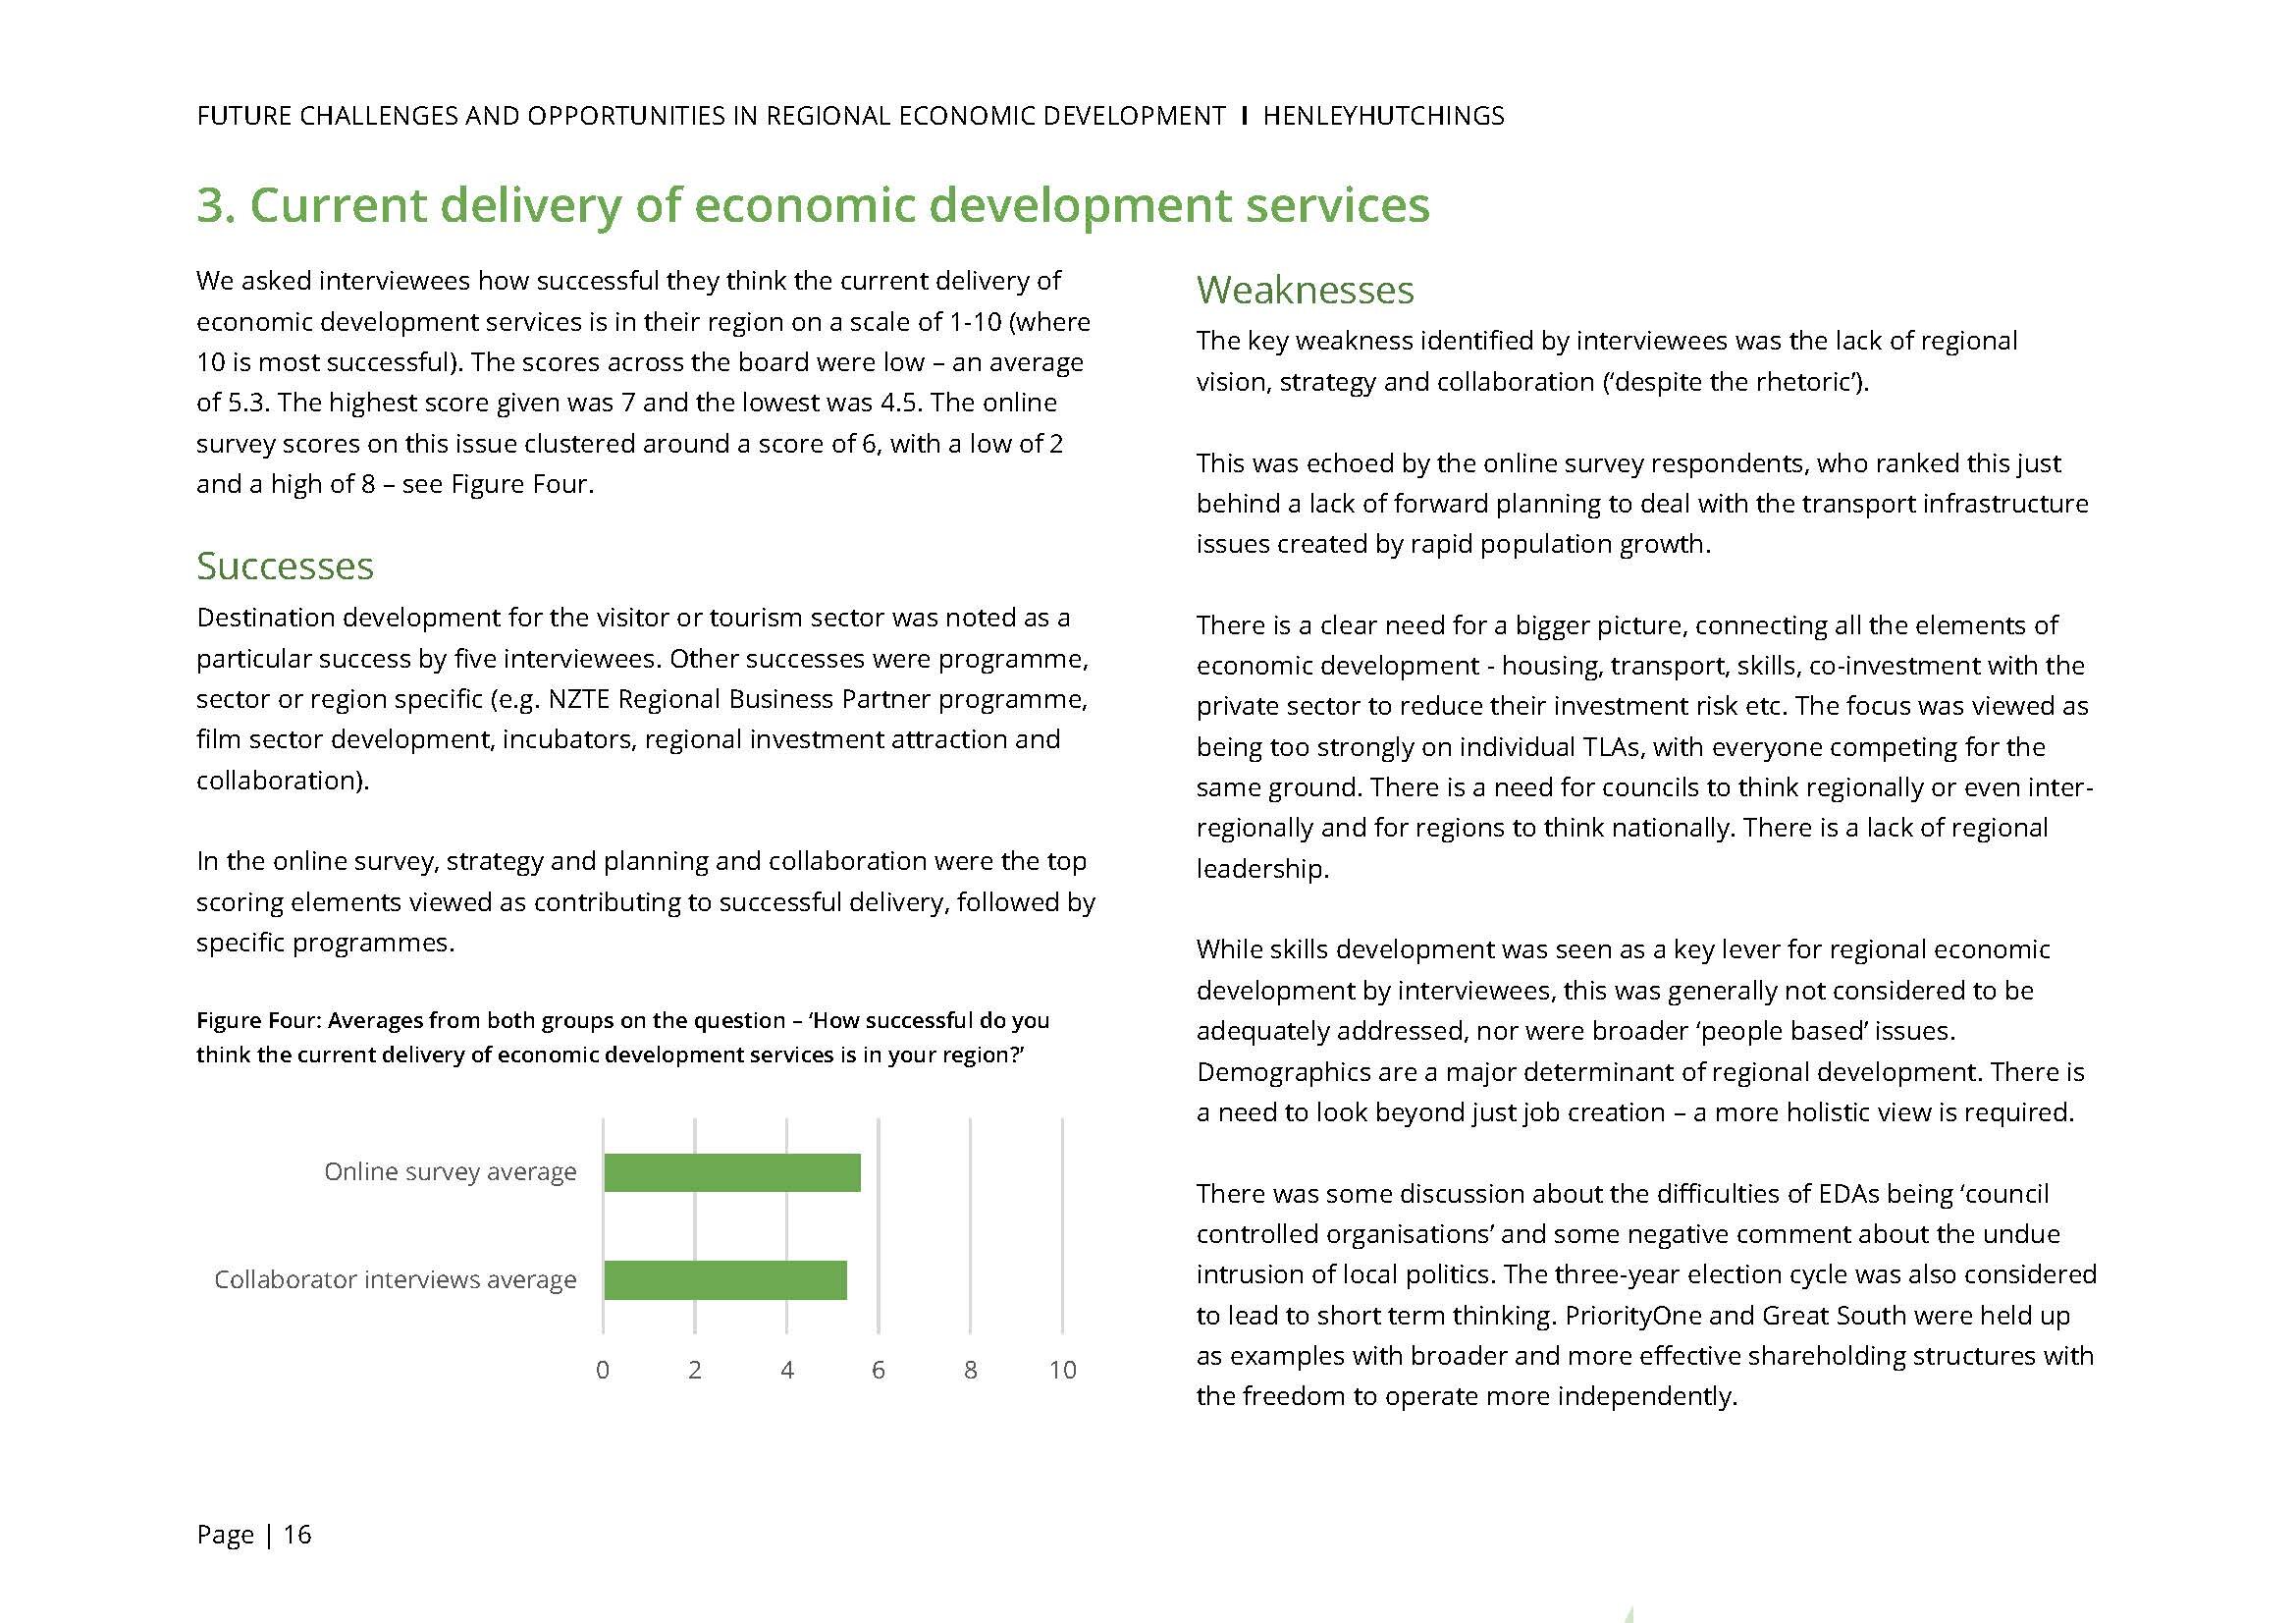 Future Challenges and Opportunities in Economic Development, HenleyHutchings TEST_Page_16.jpg